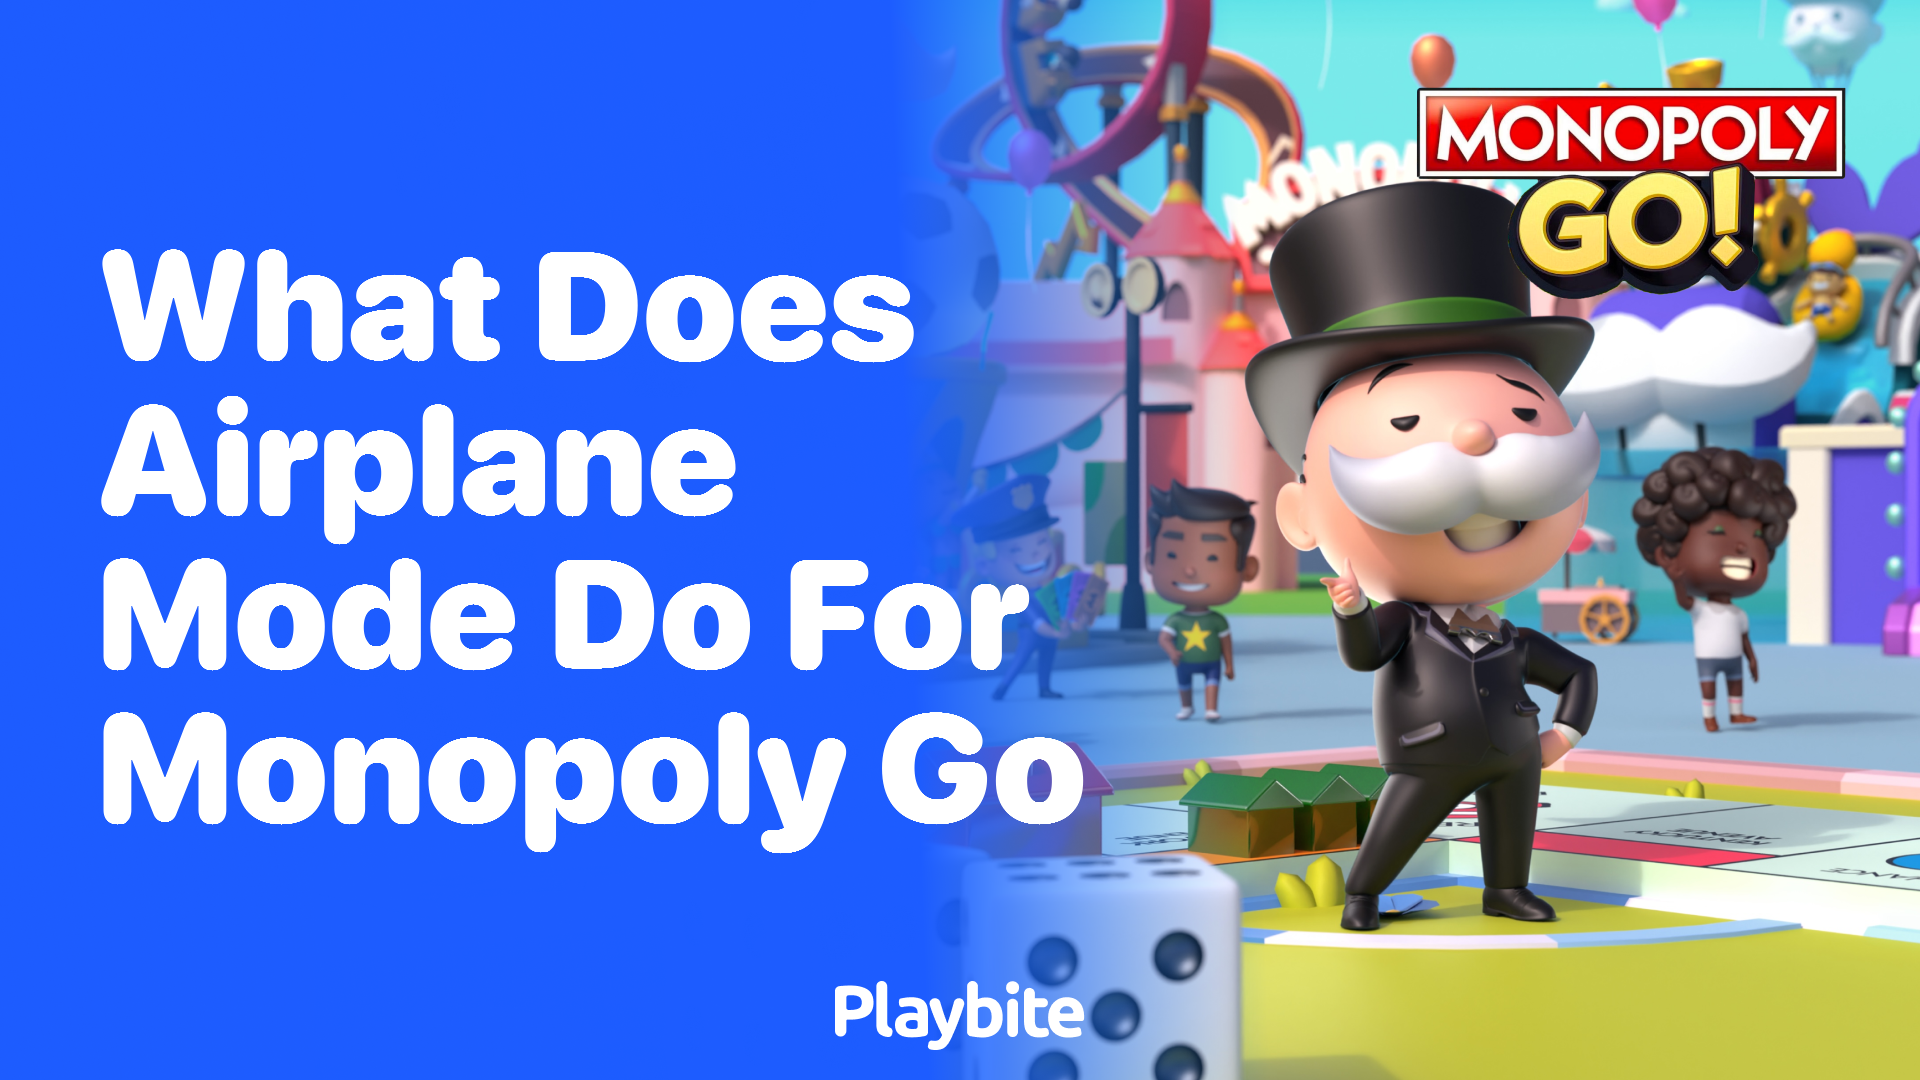 What Does Airplane Mode Do for Monopoly Go?